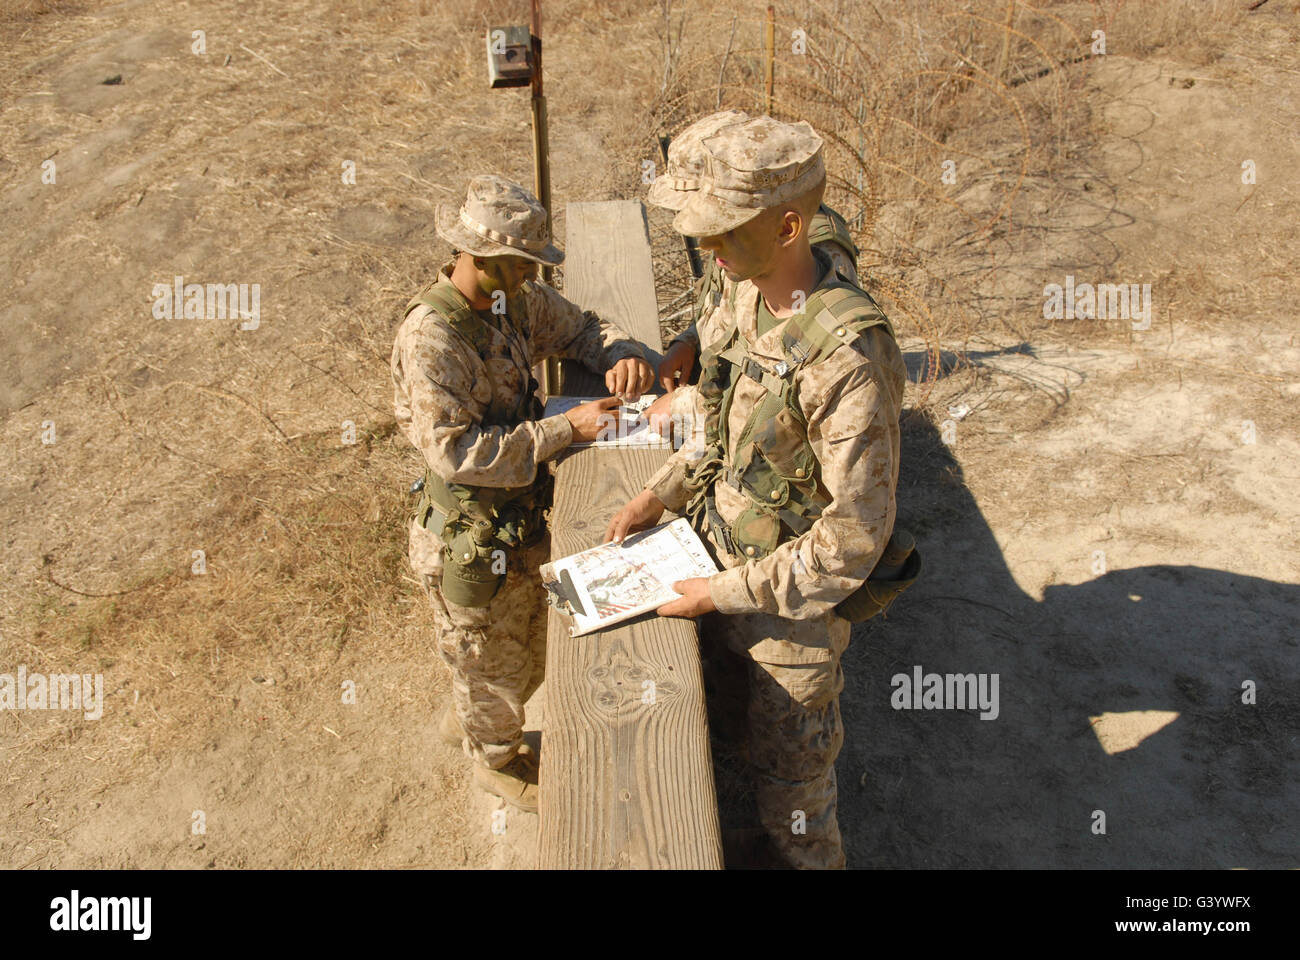 A fire team takes a minute to determine the direction of its next navigation objective. Stock Photo